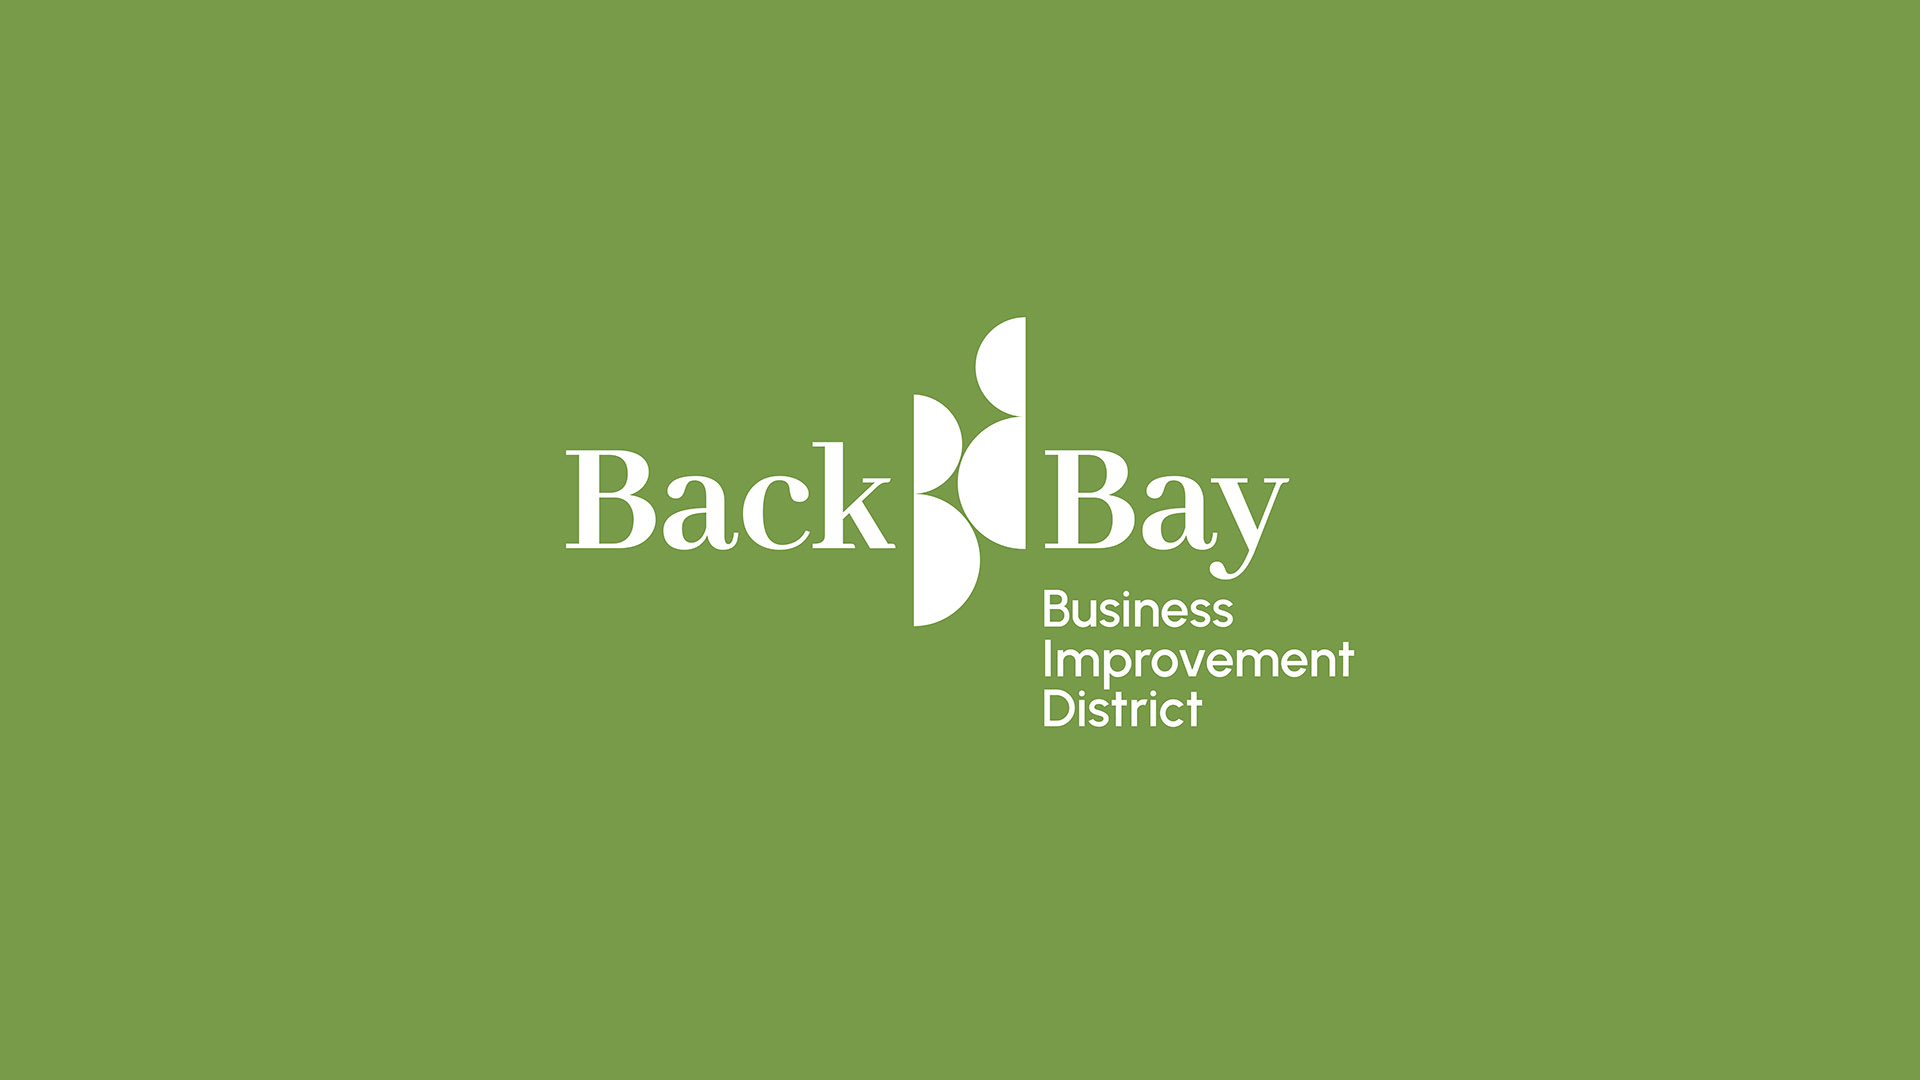 back bay business improvement district white logo on green